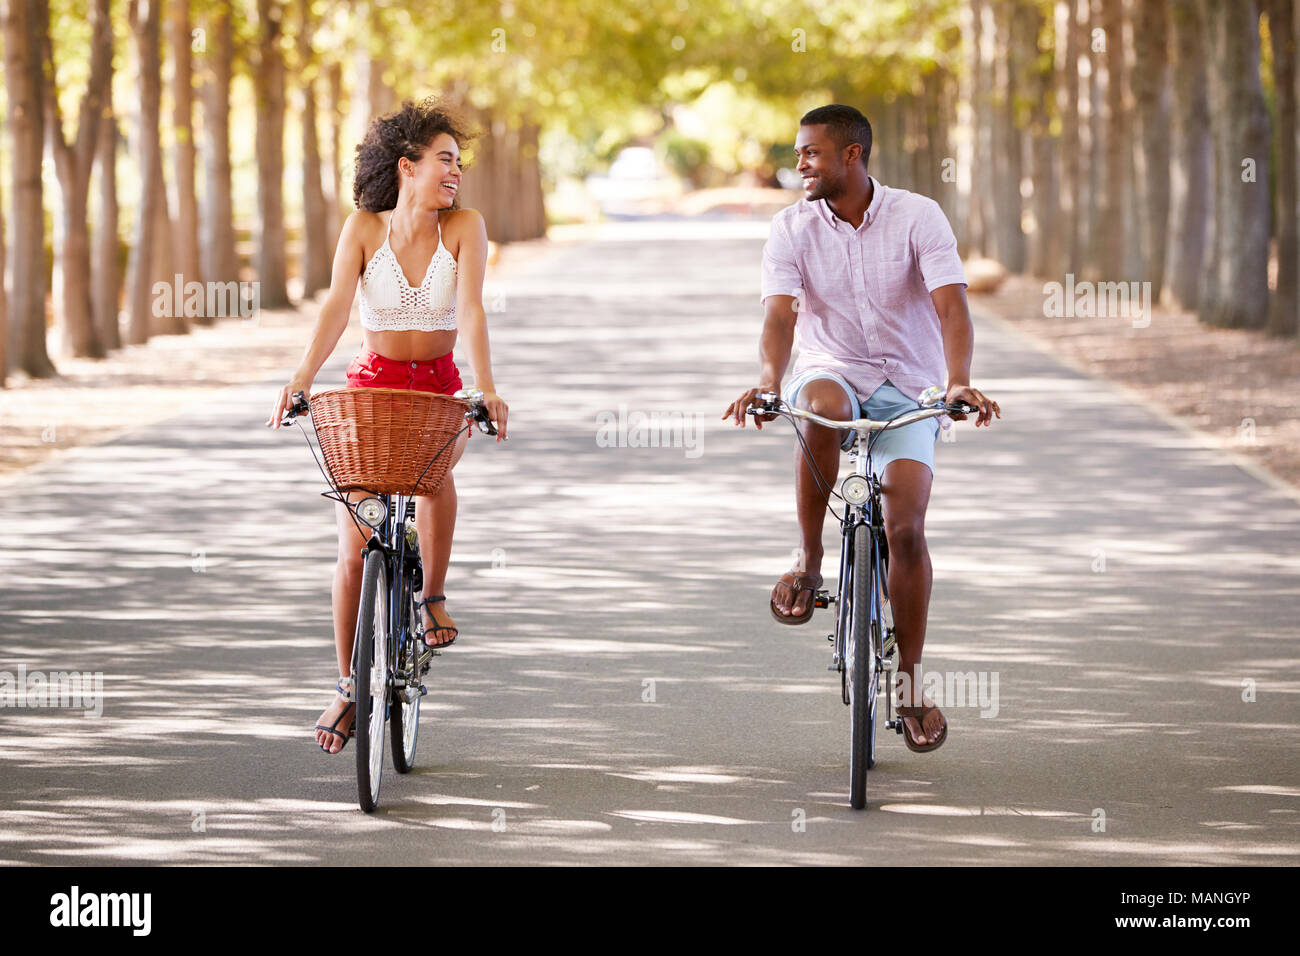 Young caucasian couple riding bicycles looking at each other Banque D'Images